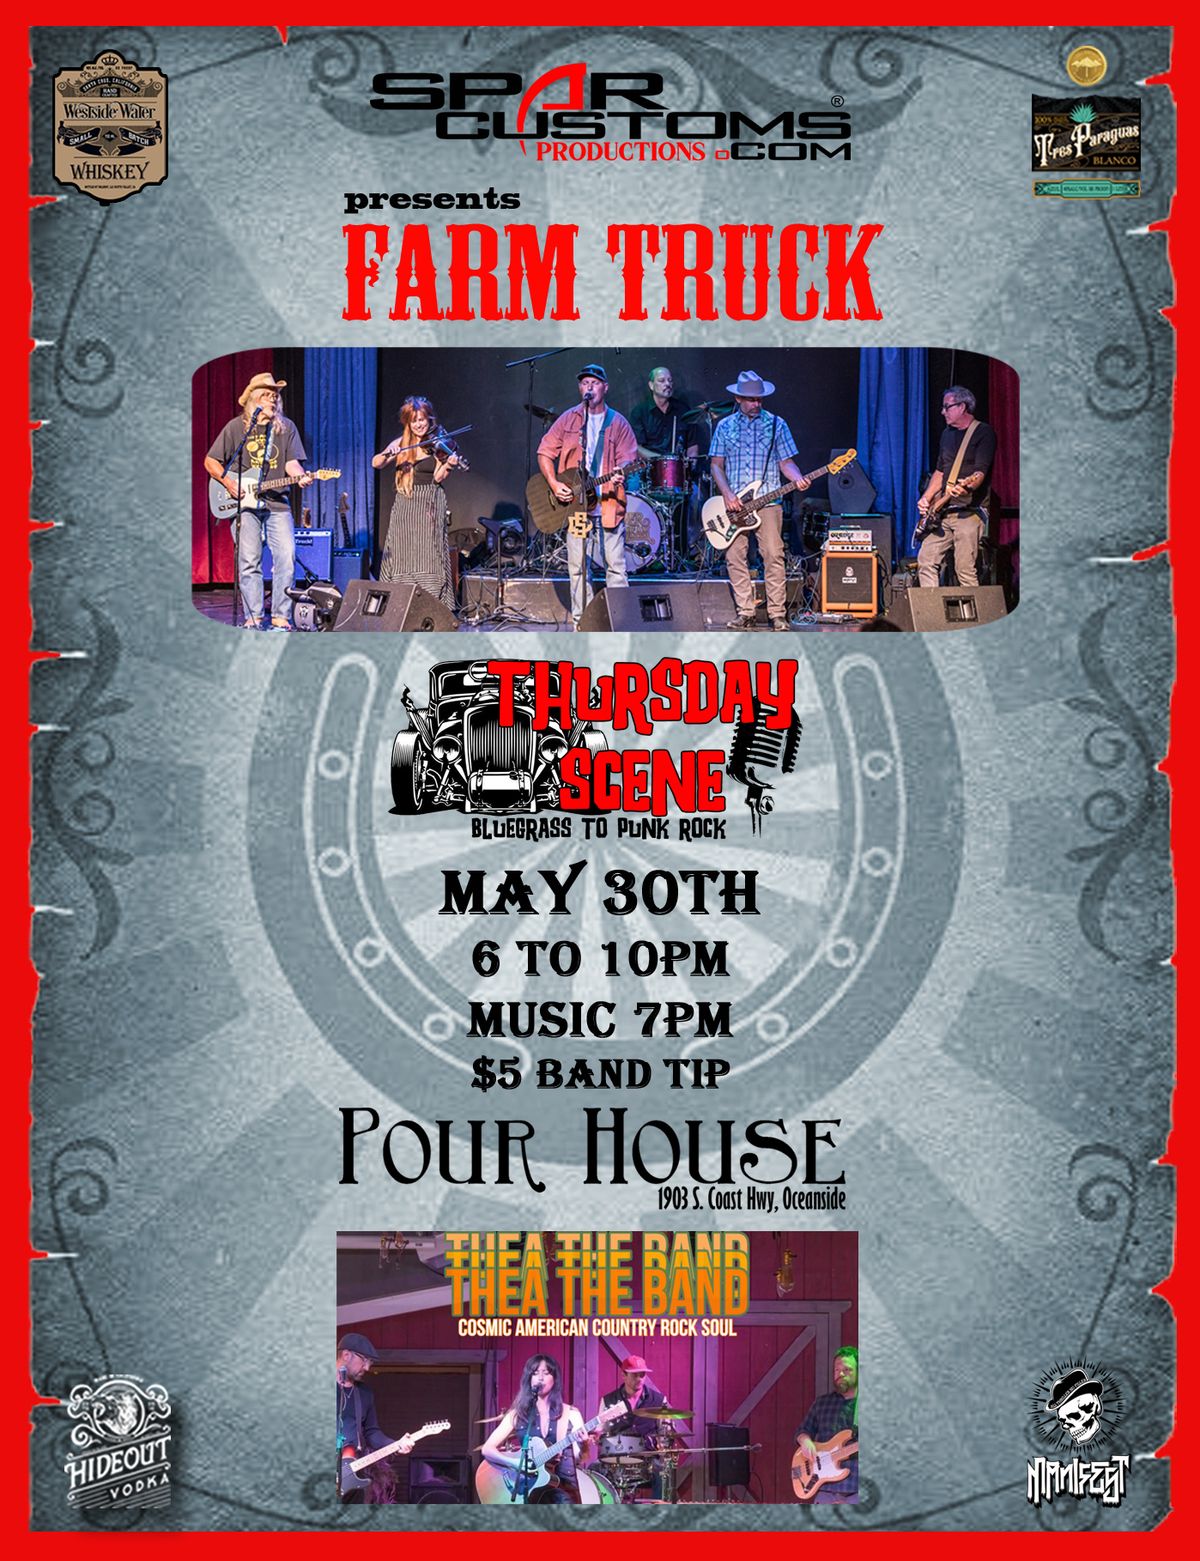 Spar Customs Thurs Scene at Pour House w Farm truck and Thea the Band